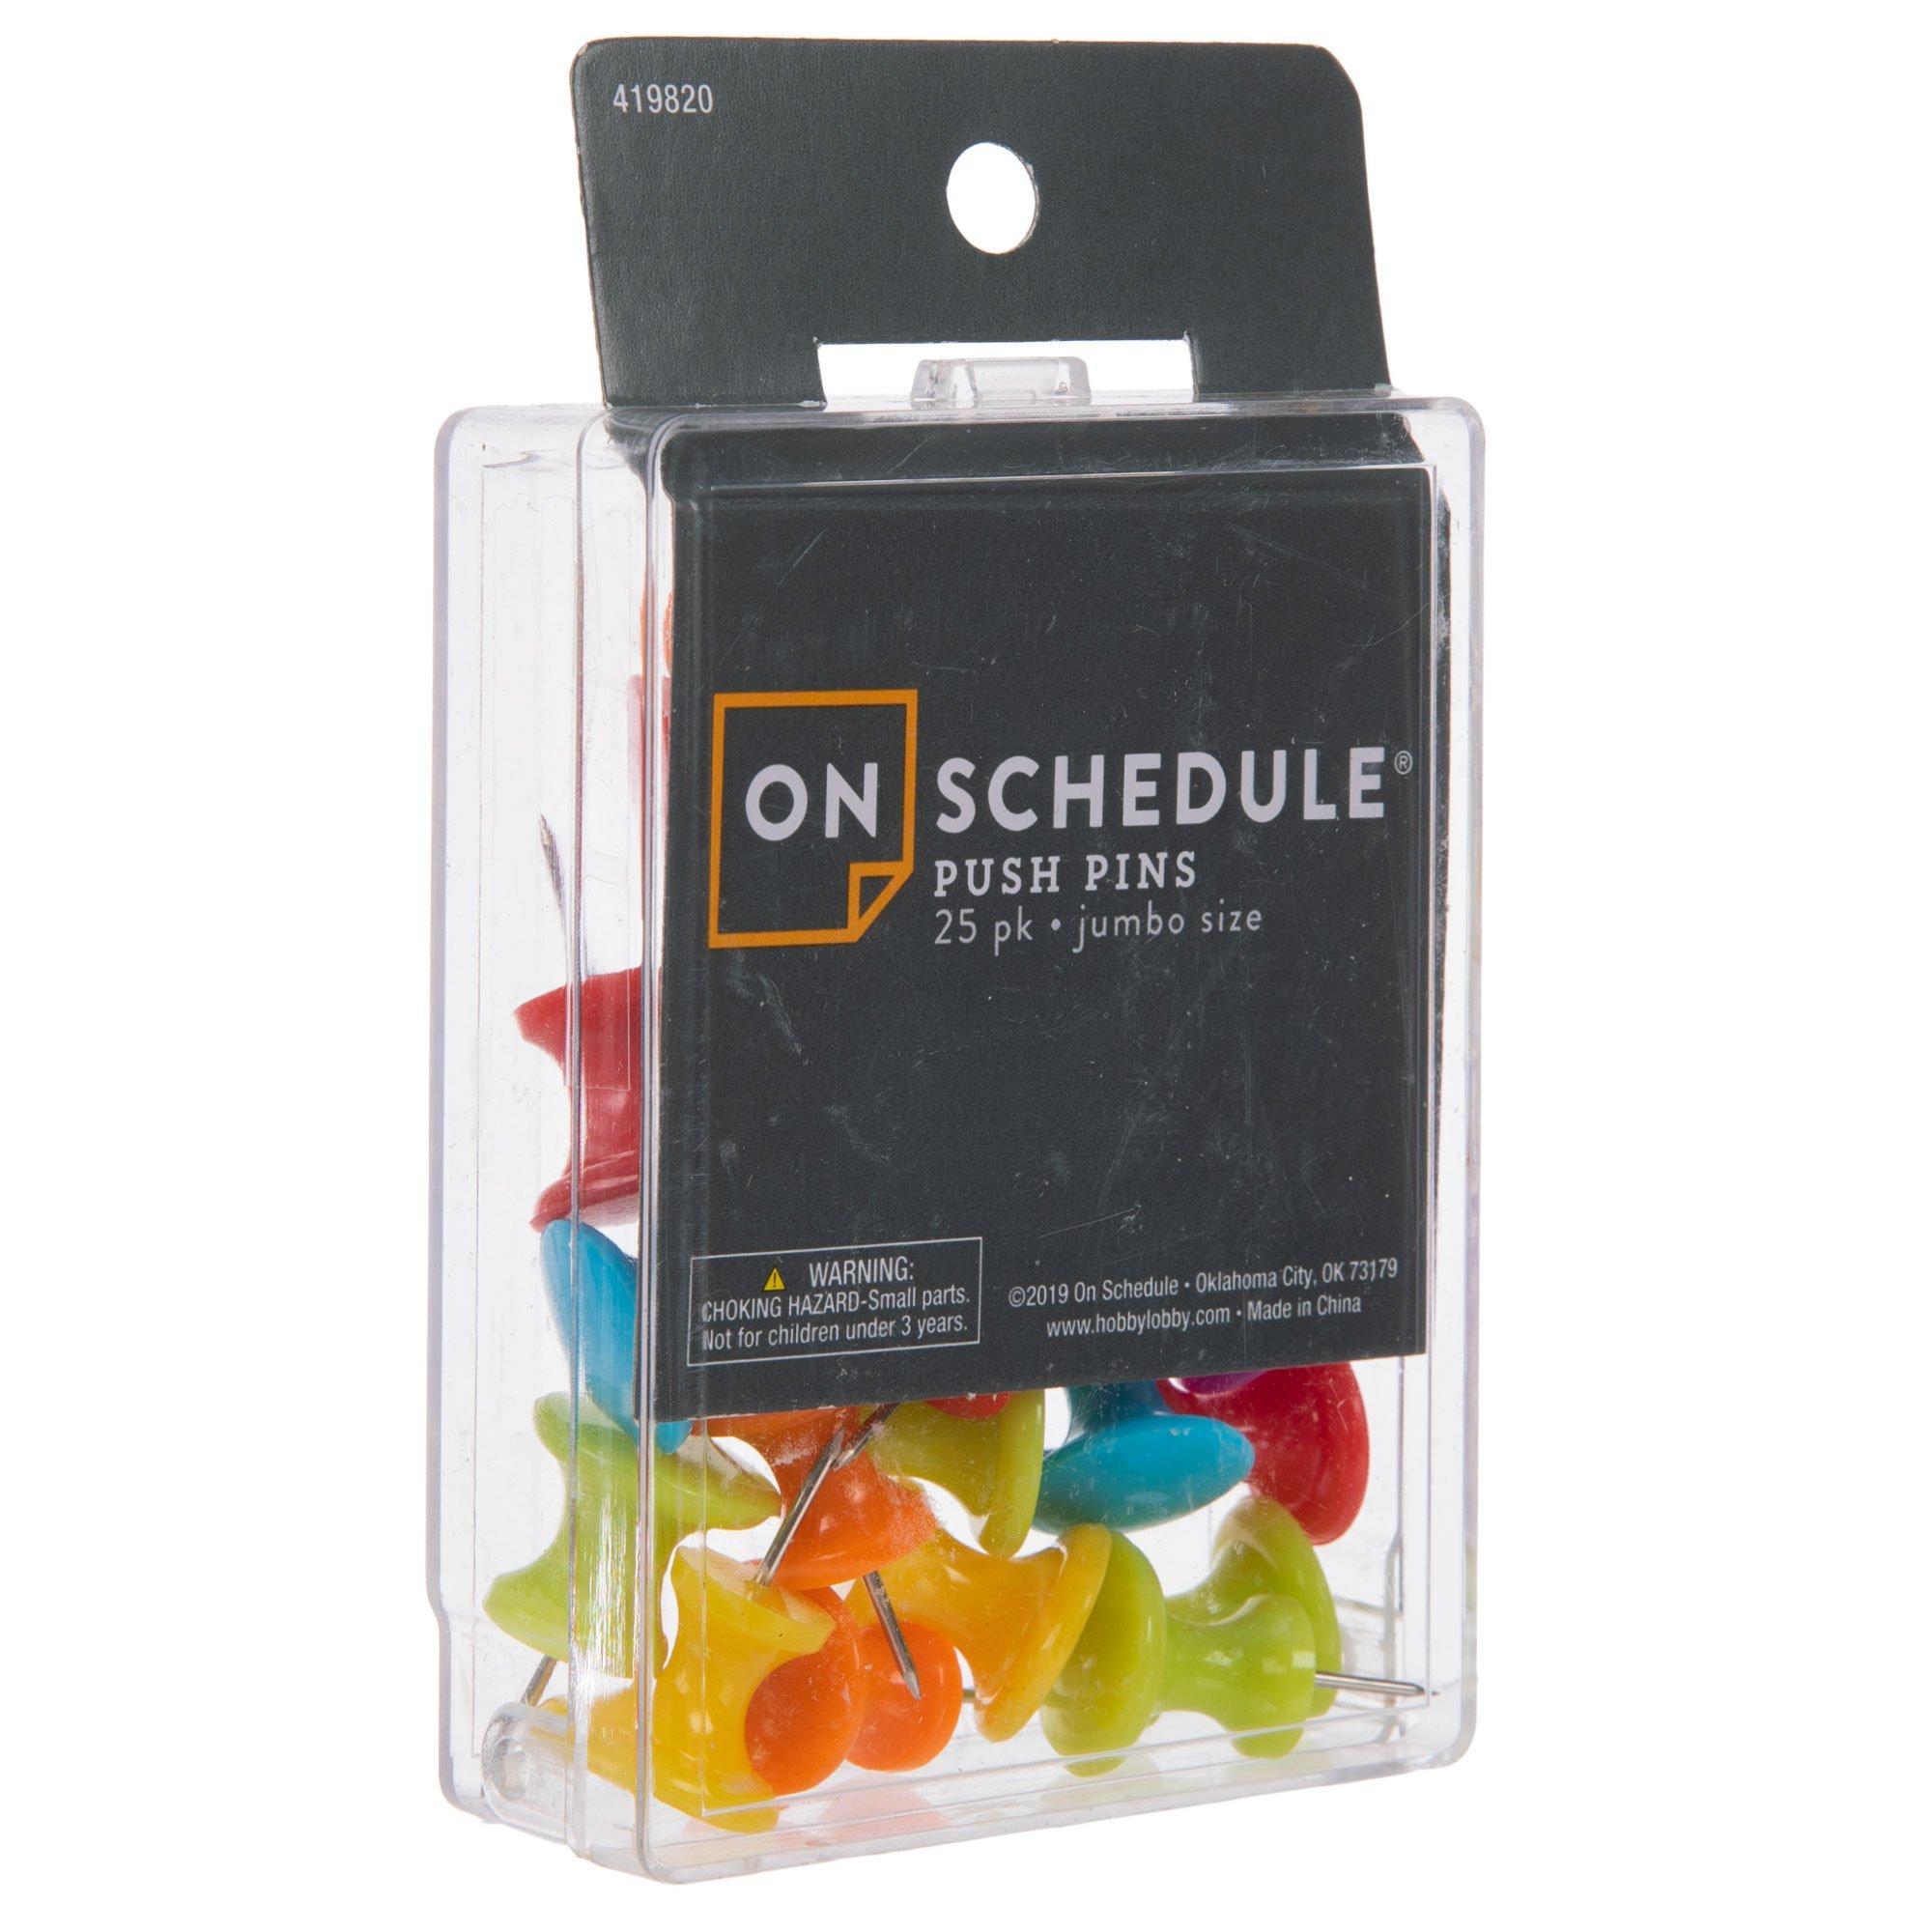 Office Works Push Pins - Assorted, 100 pk - Kroger